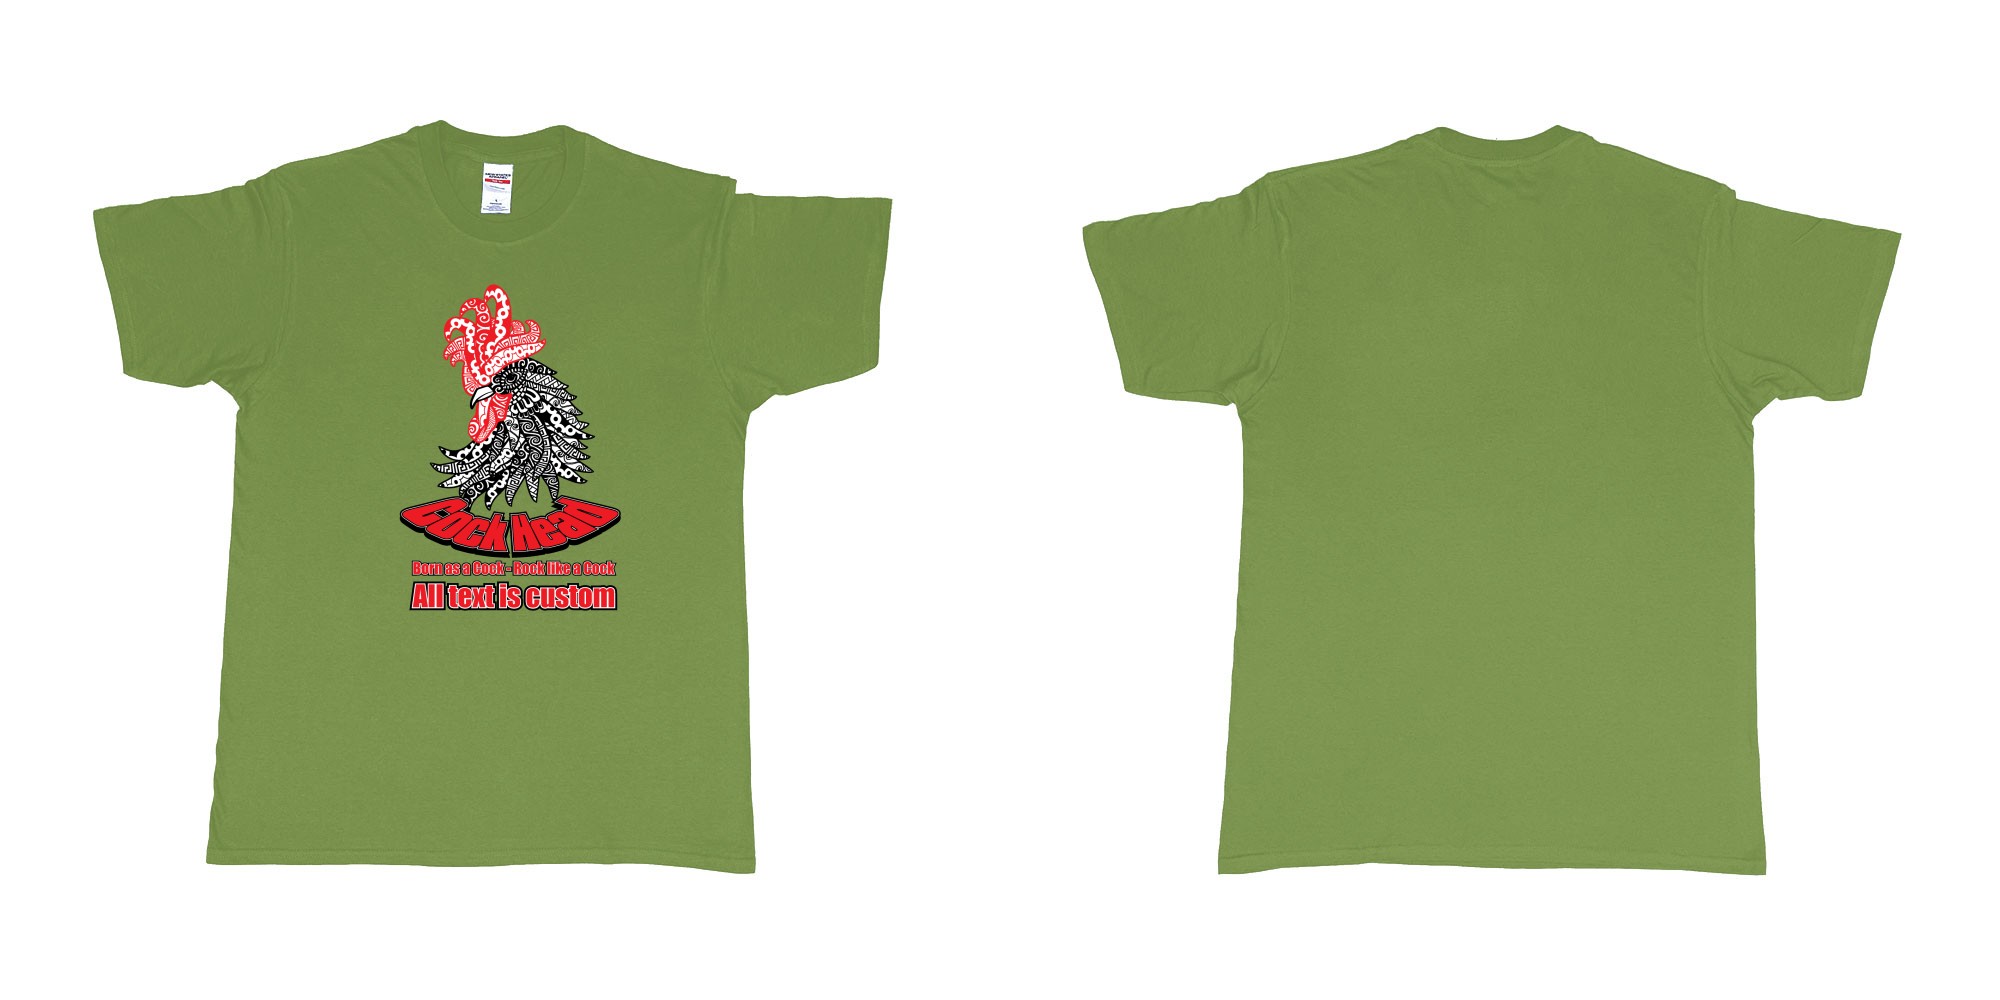 Custom tshirt design cock head rooster zodiac sign in fabric color military-green choice your own text made in Bali by The Pirate Way